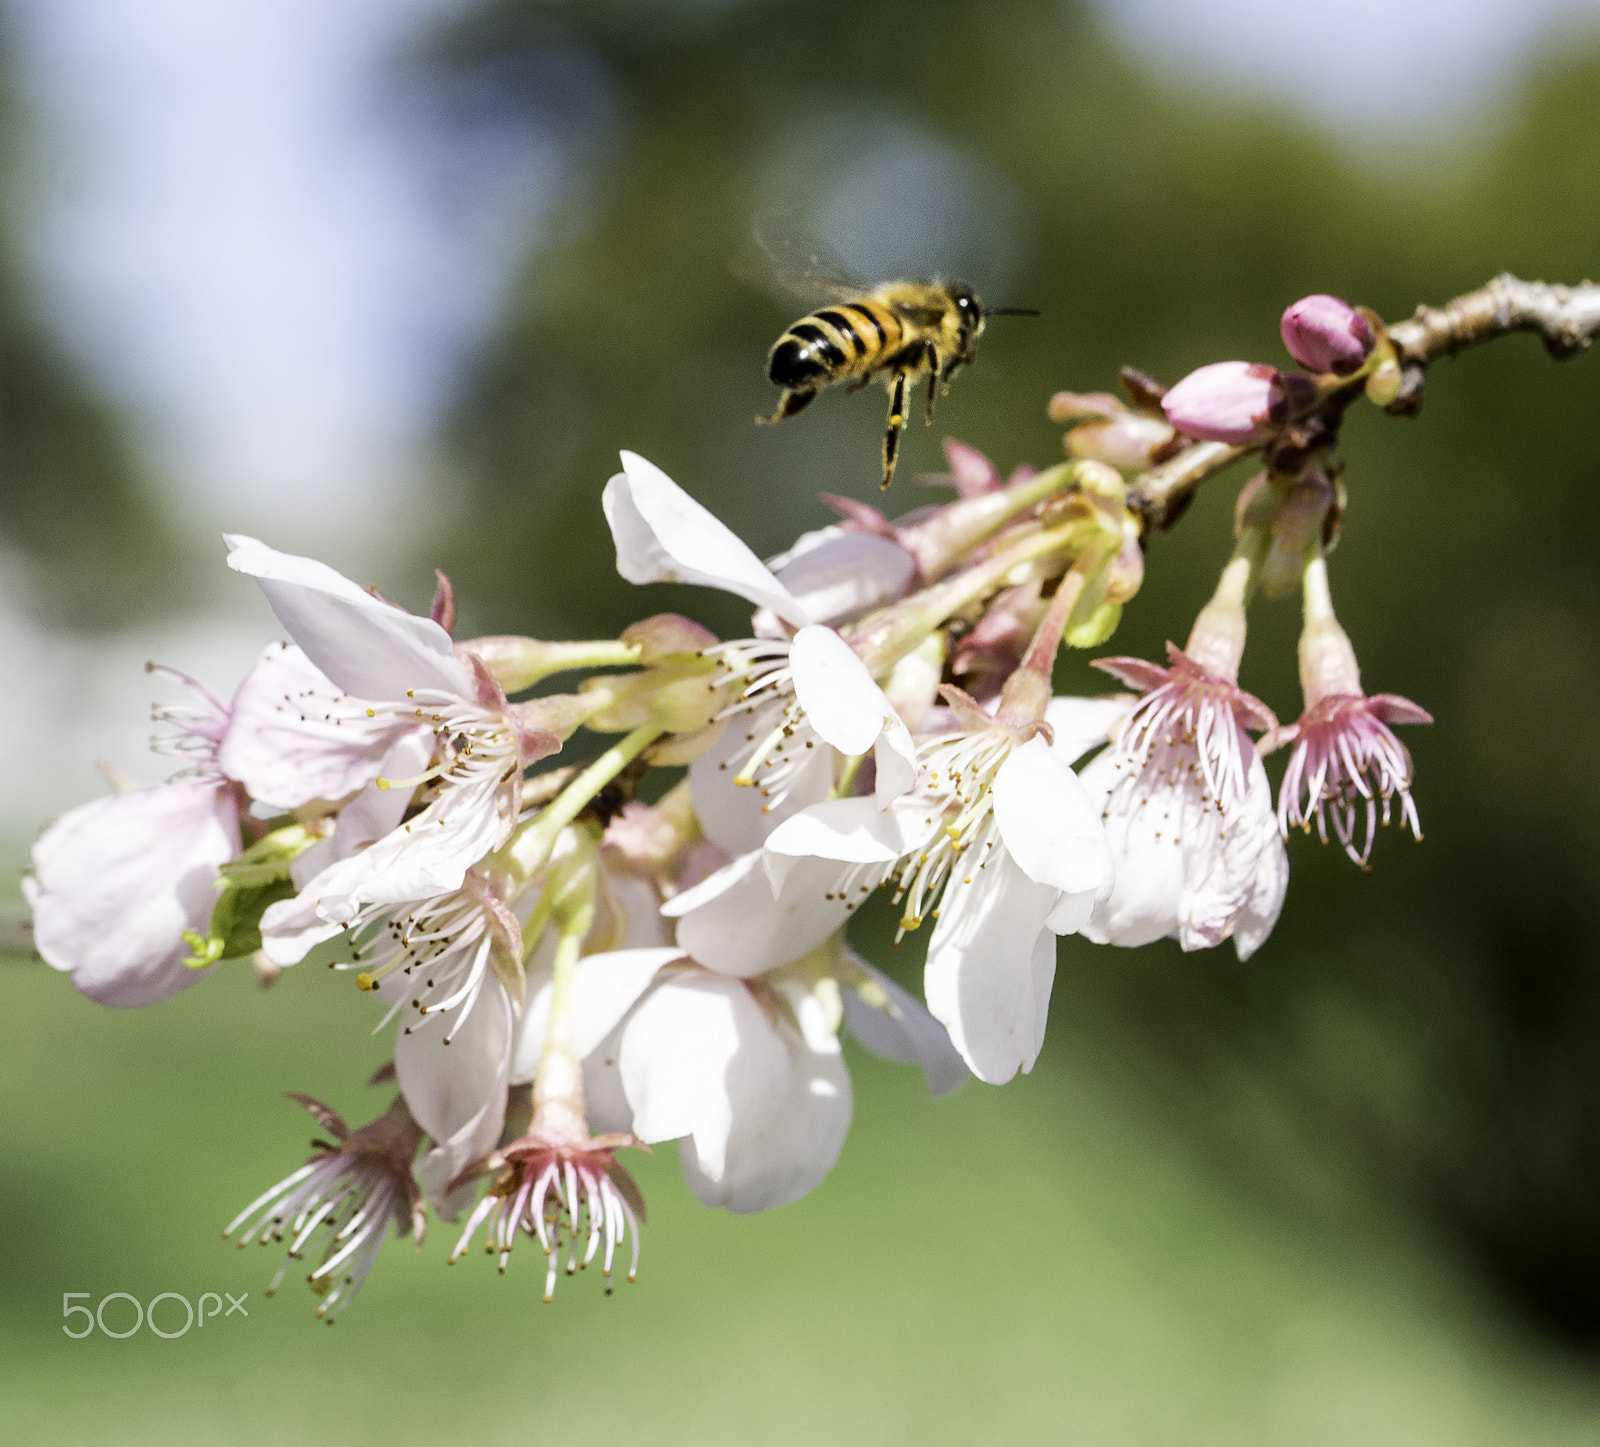 Sony a7 sample photo. The bee photography